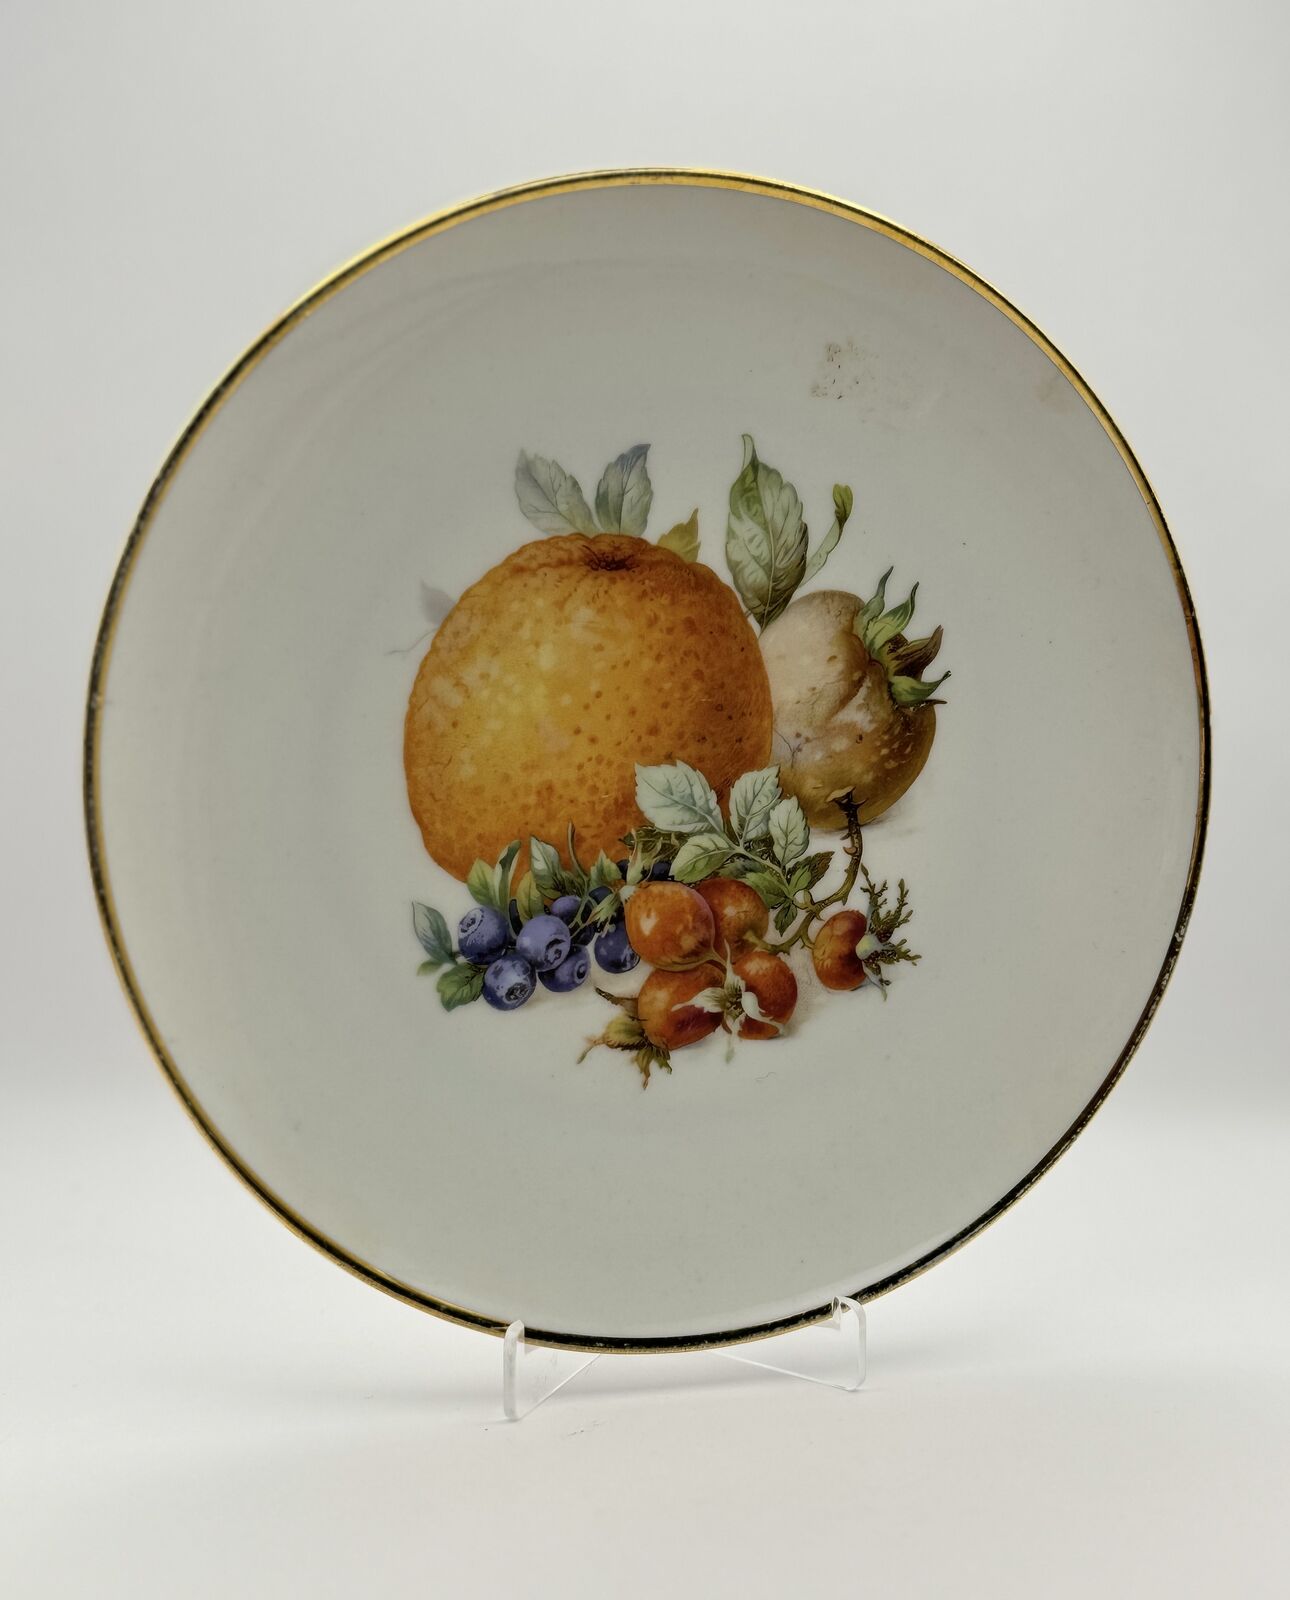 Rare Schumann Arzberg Germany Hand-Painted Fruit Plate with Gold Rim